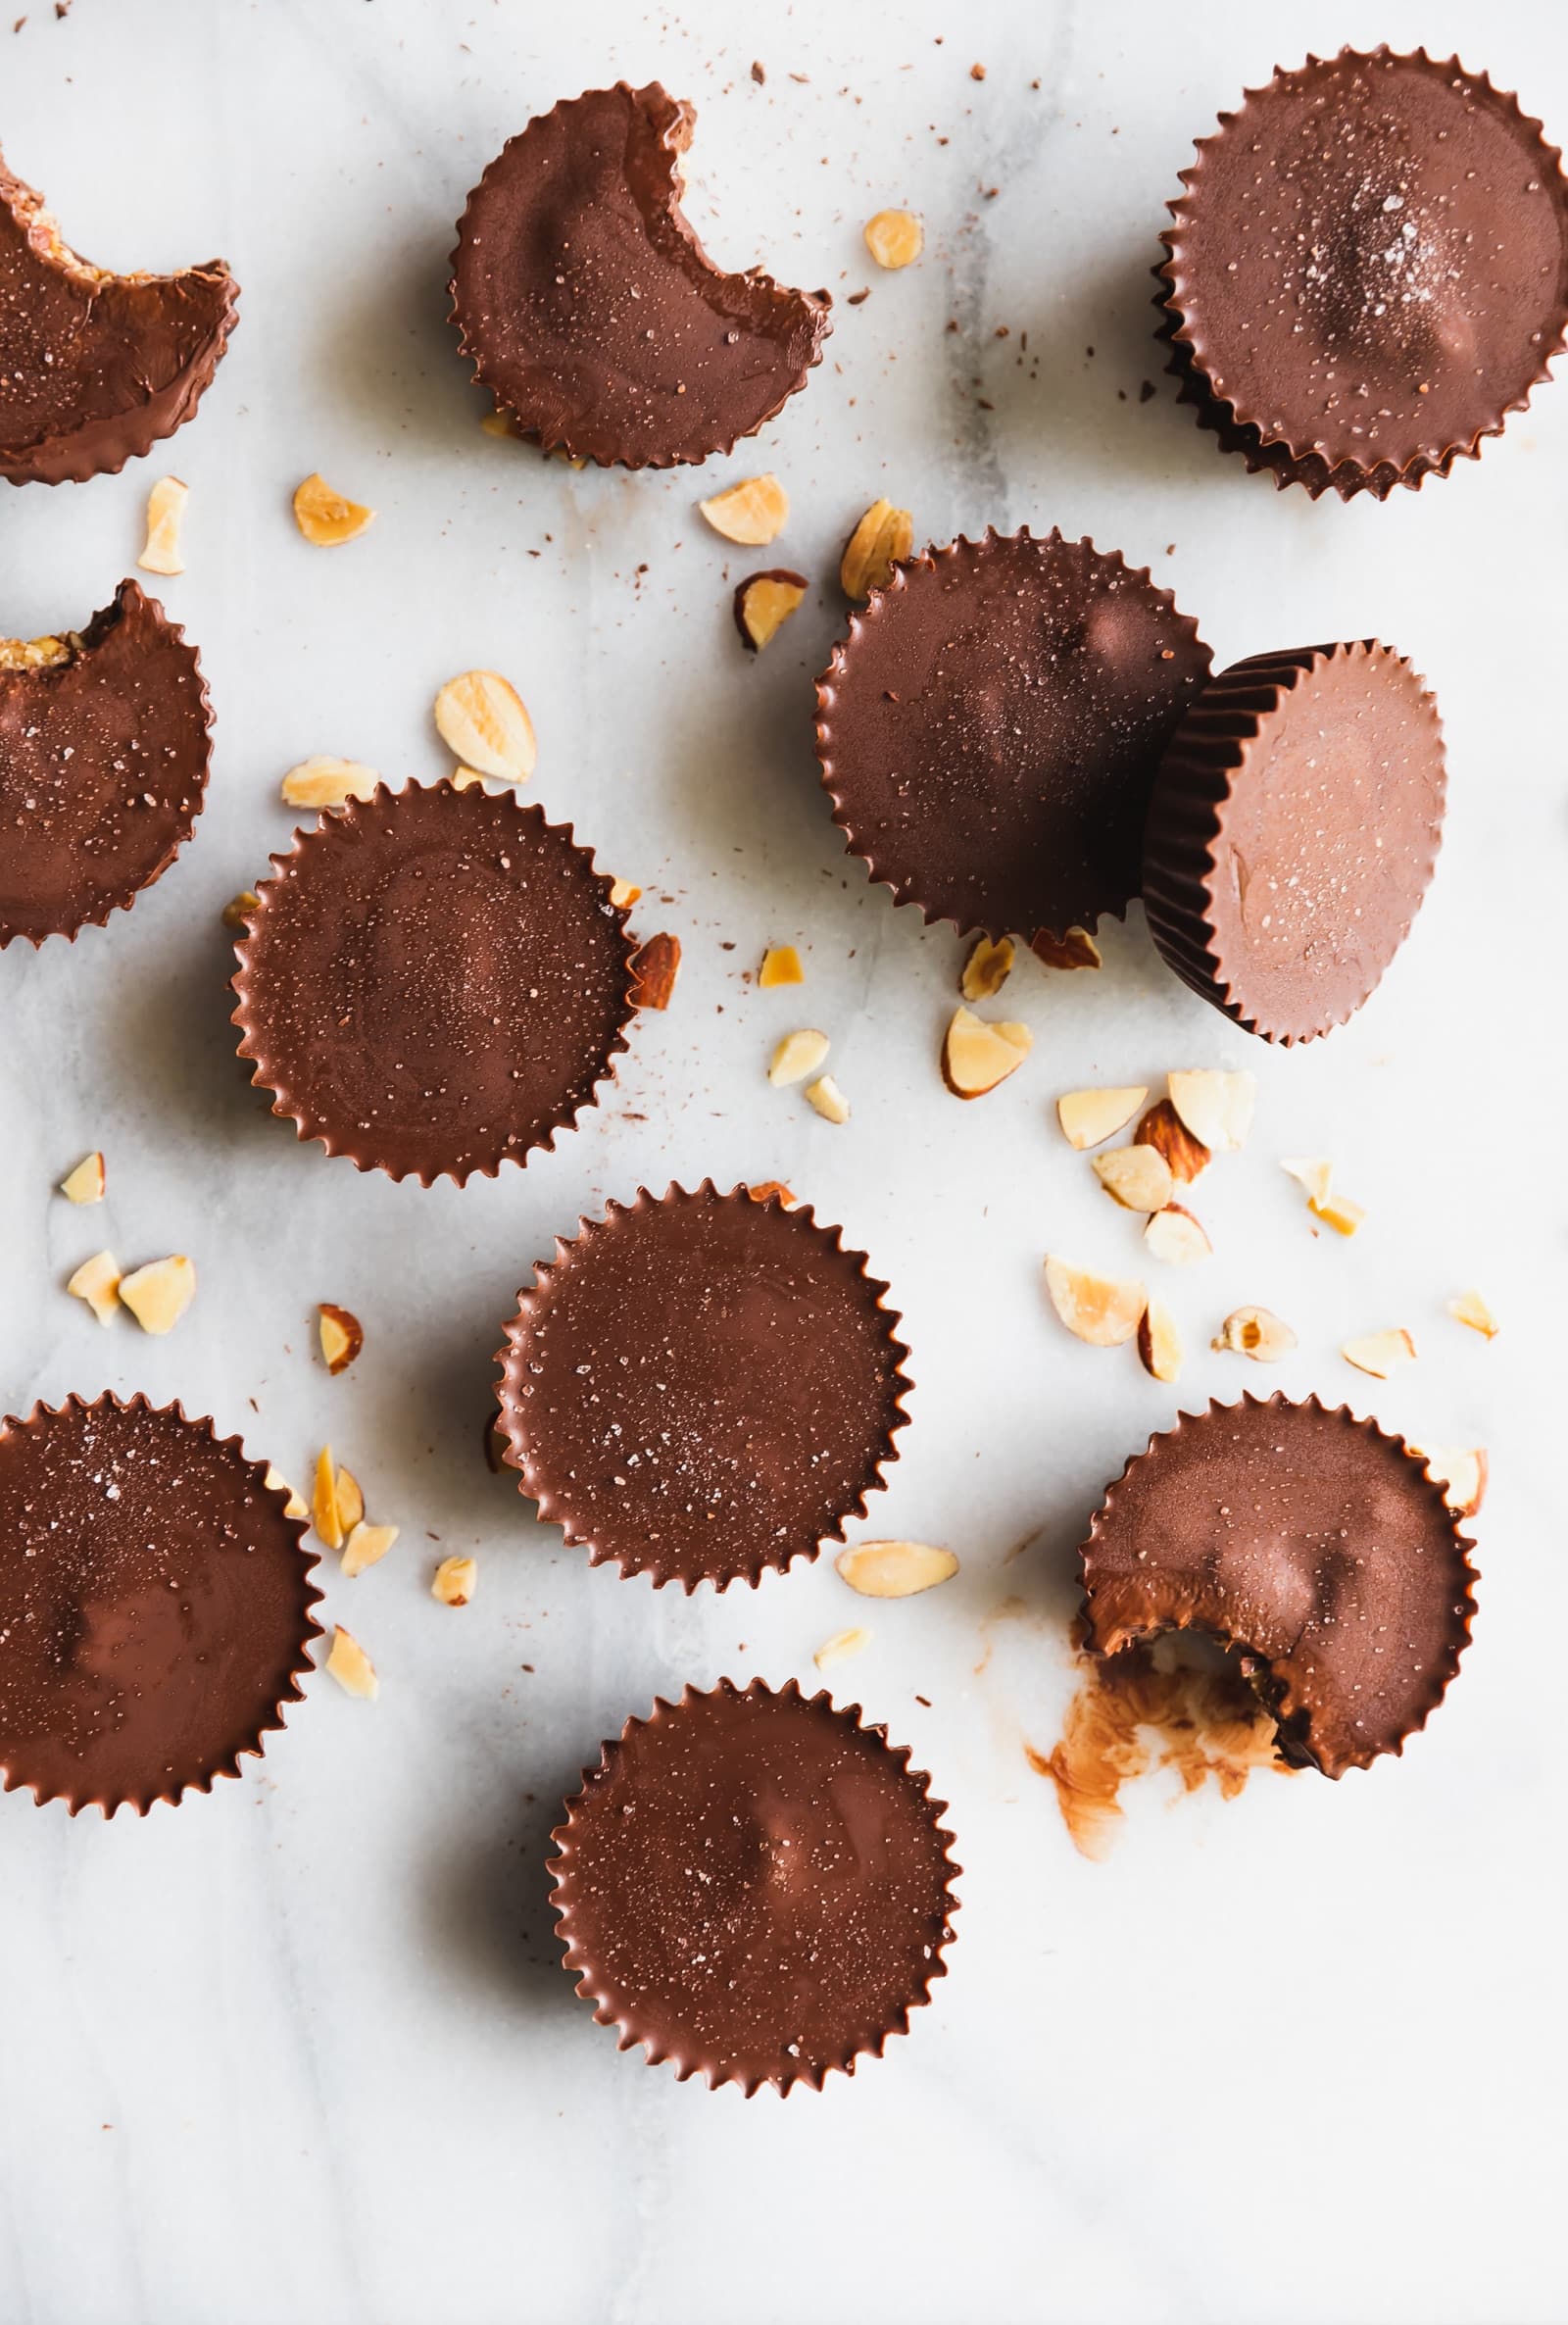 These almond butter cups are made with just 5 ingredients -  dark chocolate, coconut oil, almond butter, chopped almonds, and sea salt. Perfect snack!